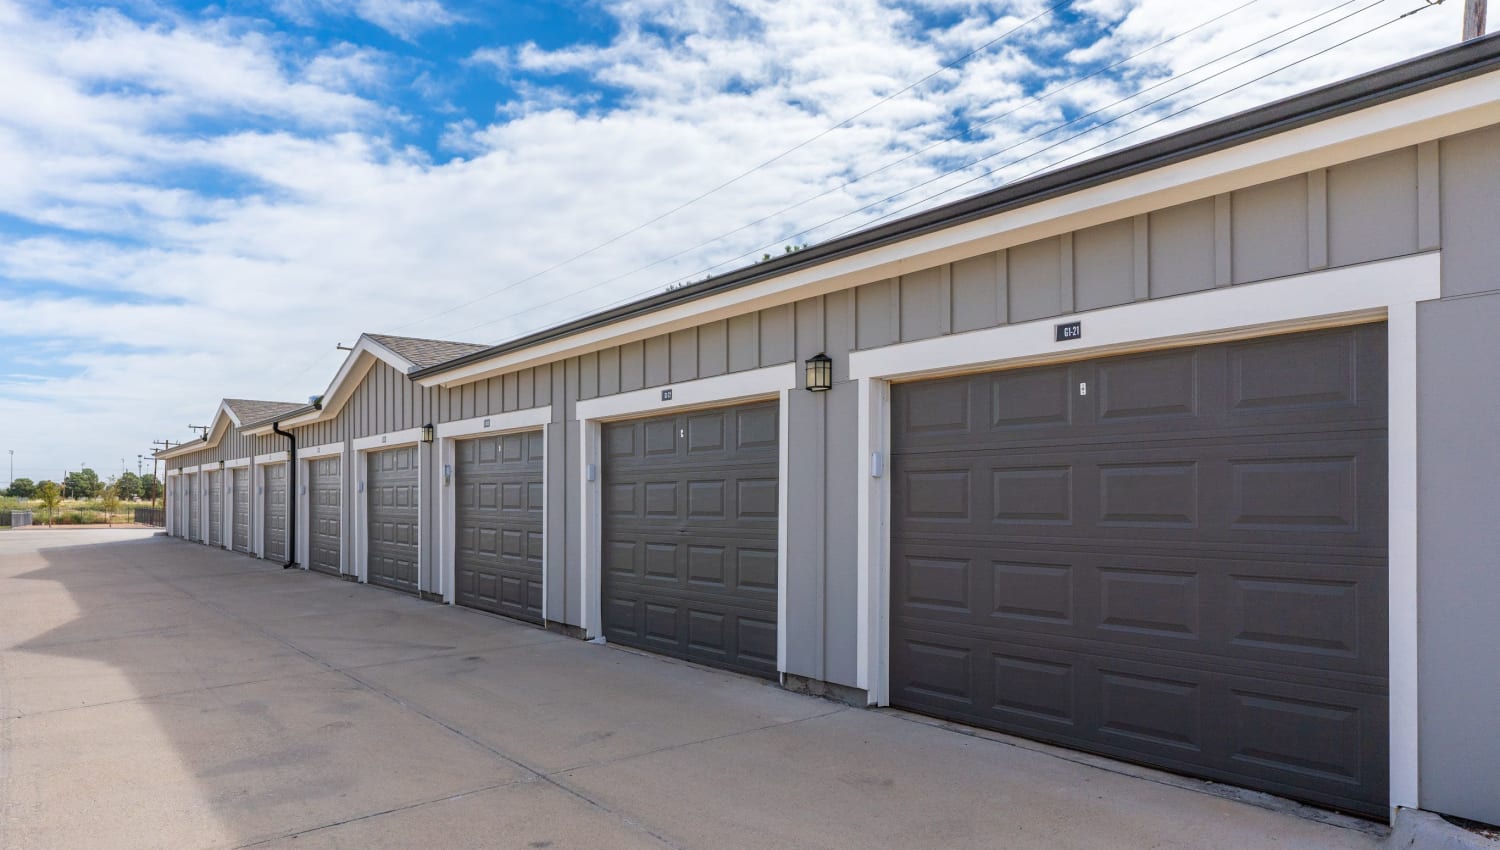 Garage spaces at The Everett at Ally Village in Midland, Texas